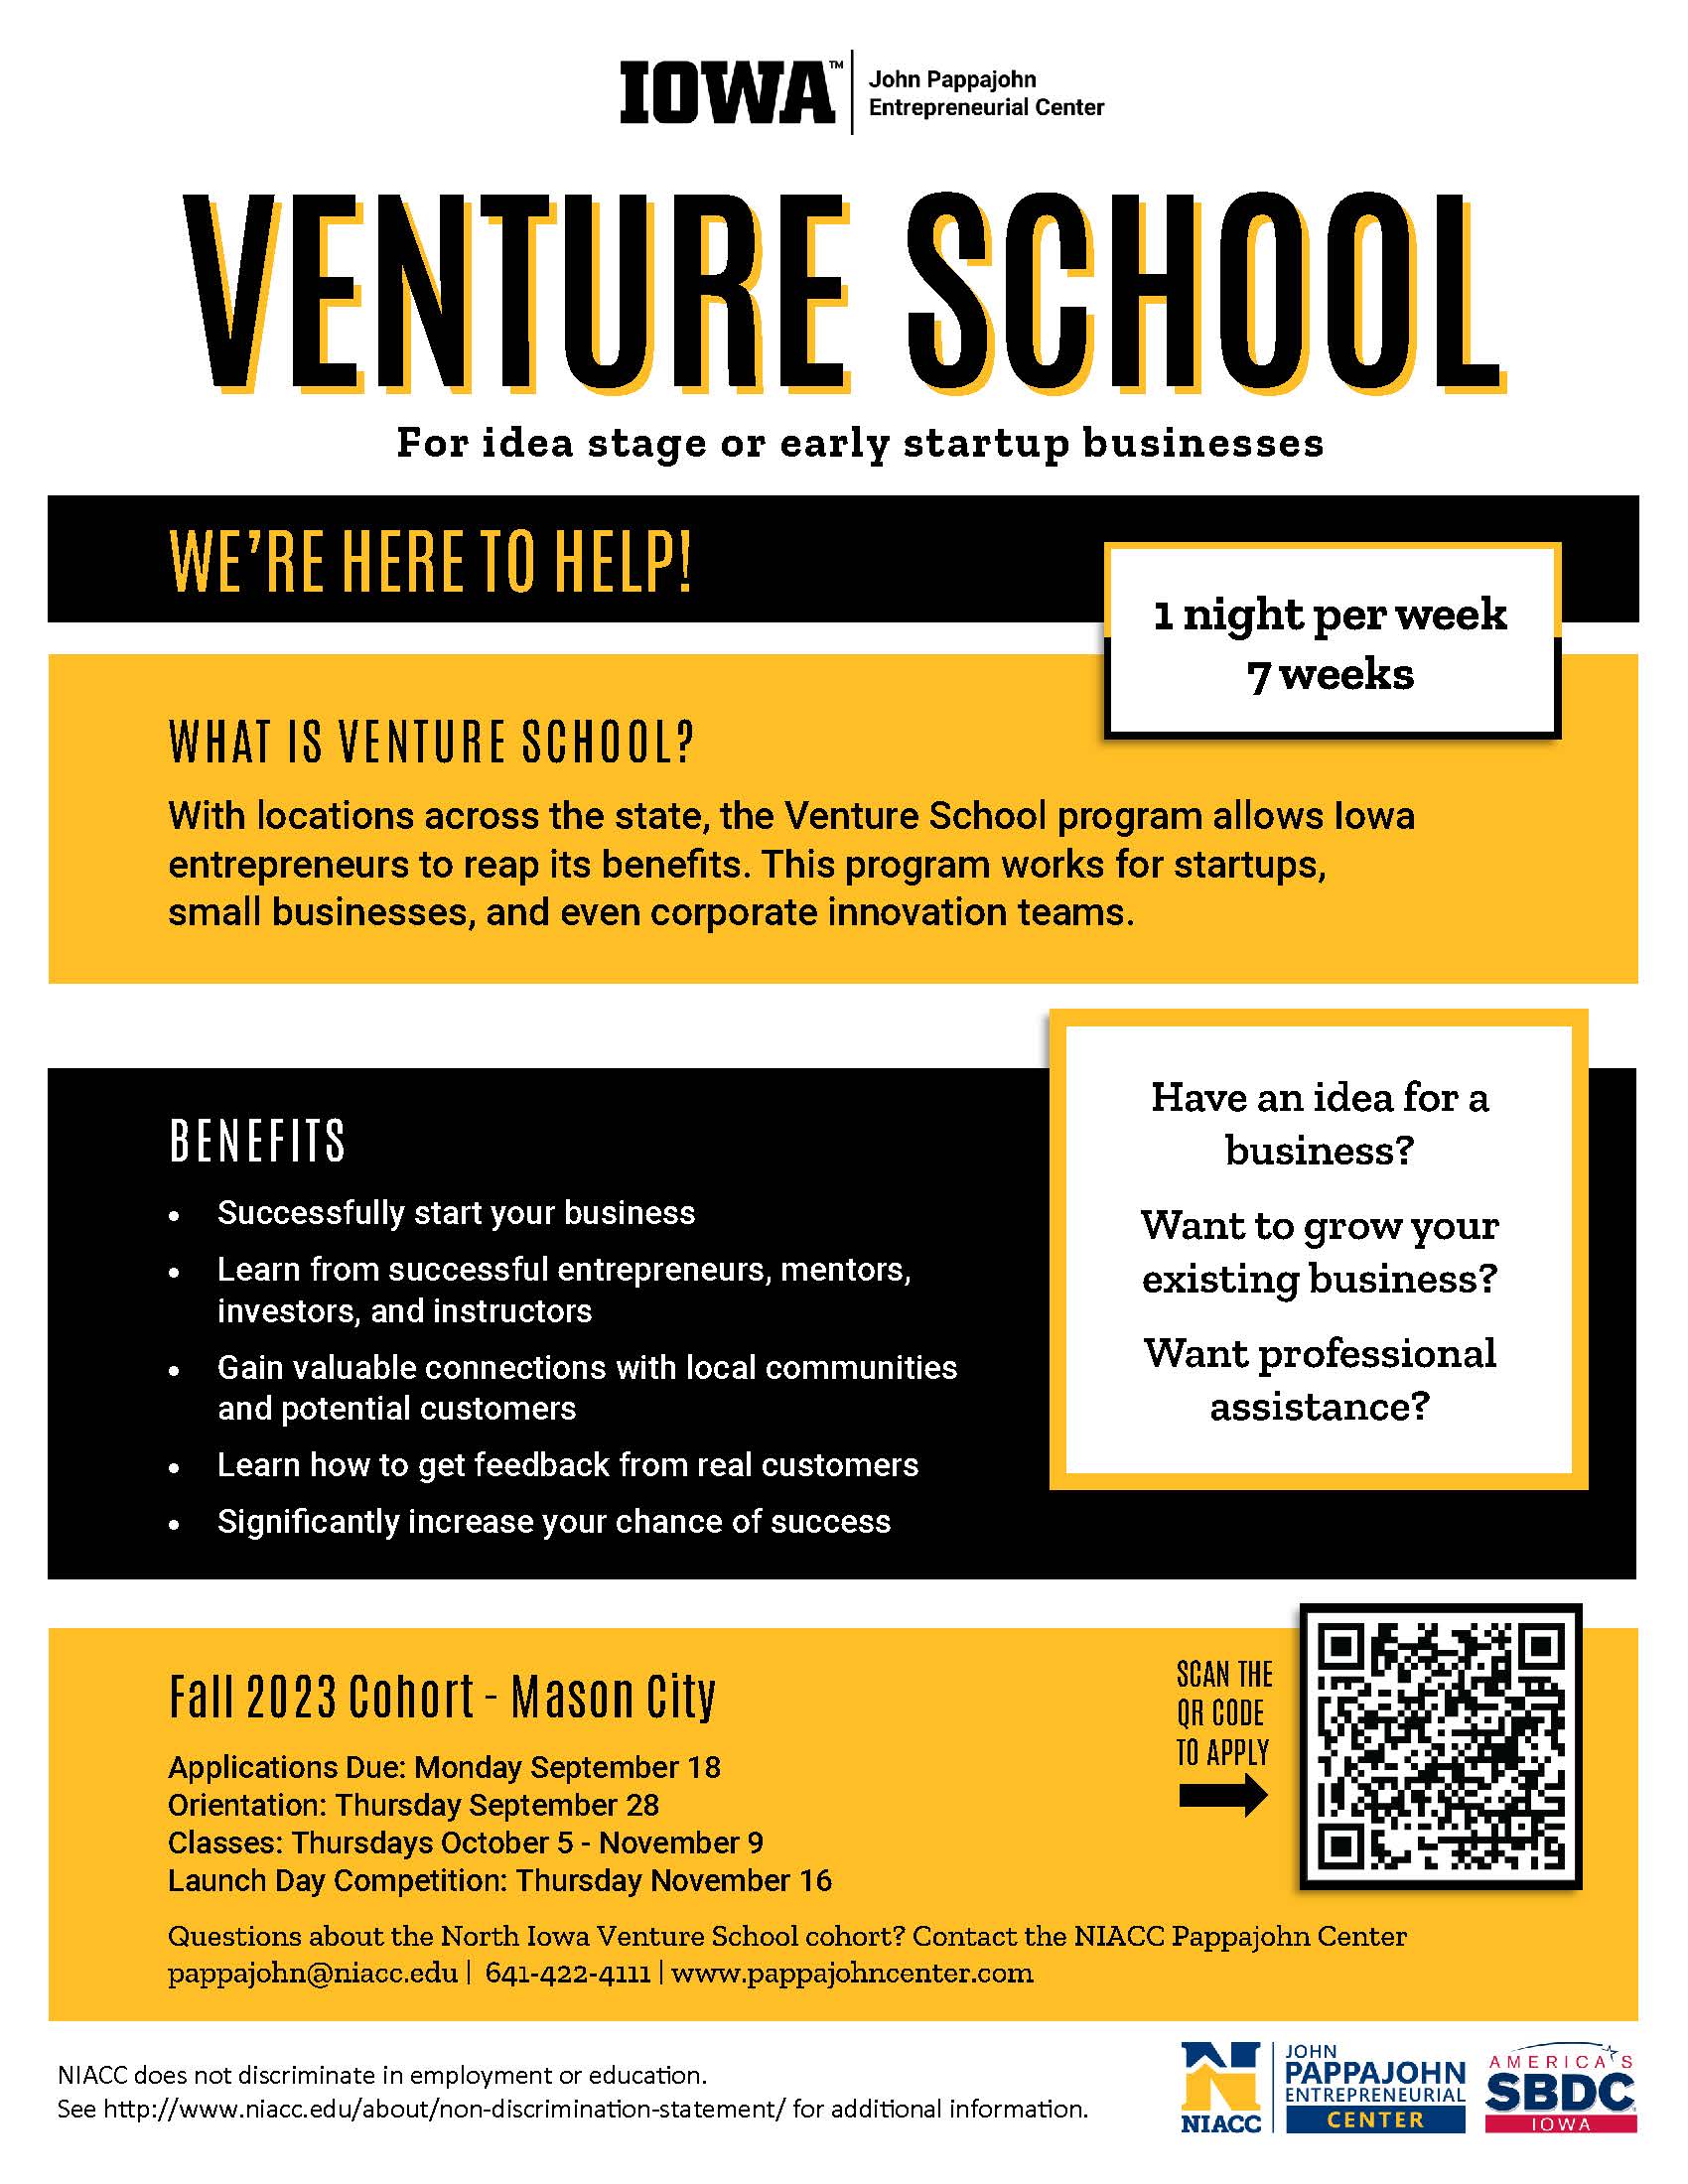 An eye-catching flyer for Iowa Venture School, inviting individuals to join its community of entrepreneurs.